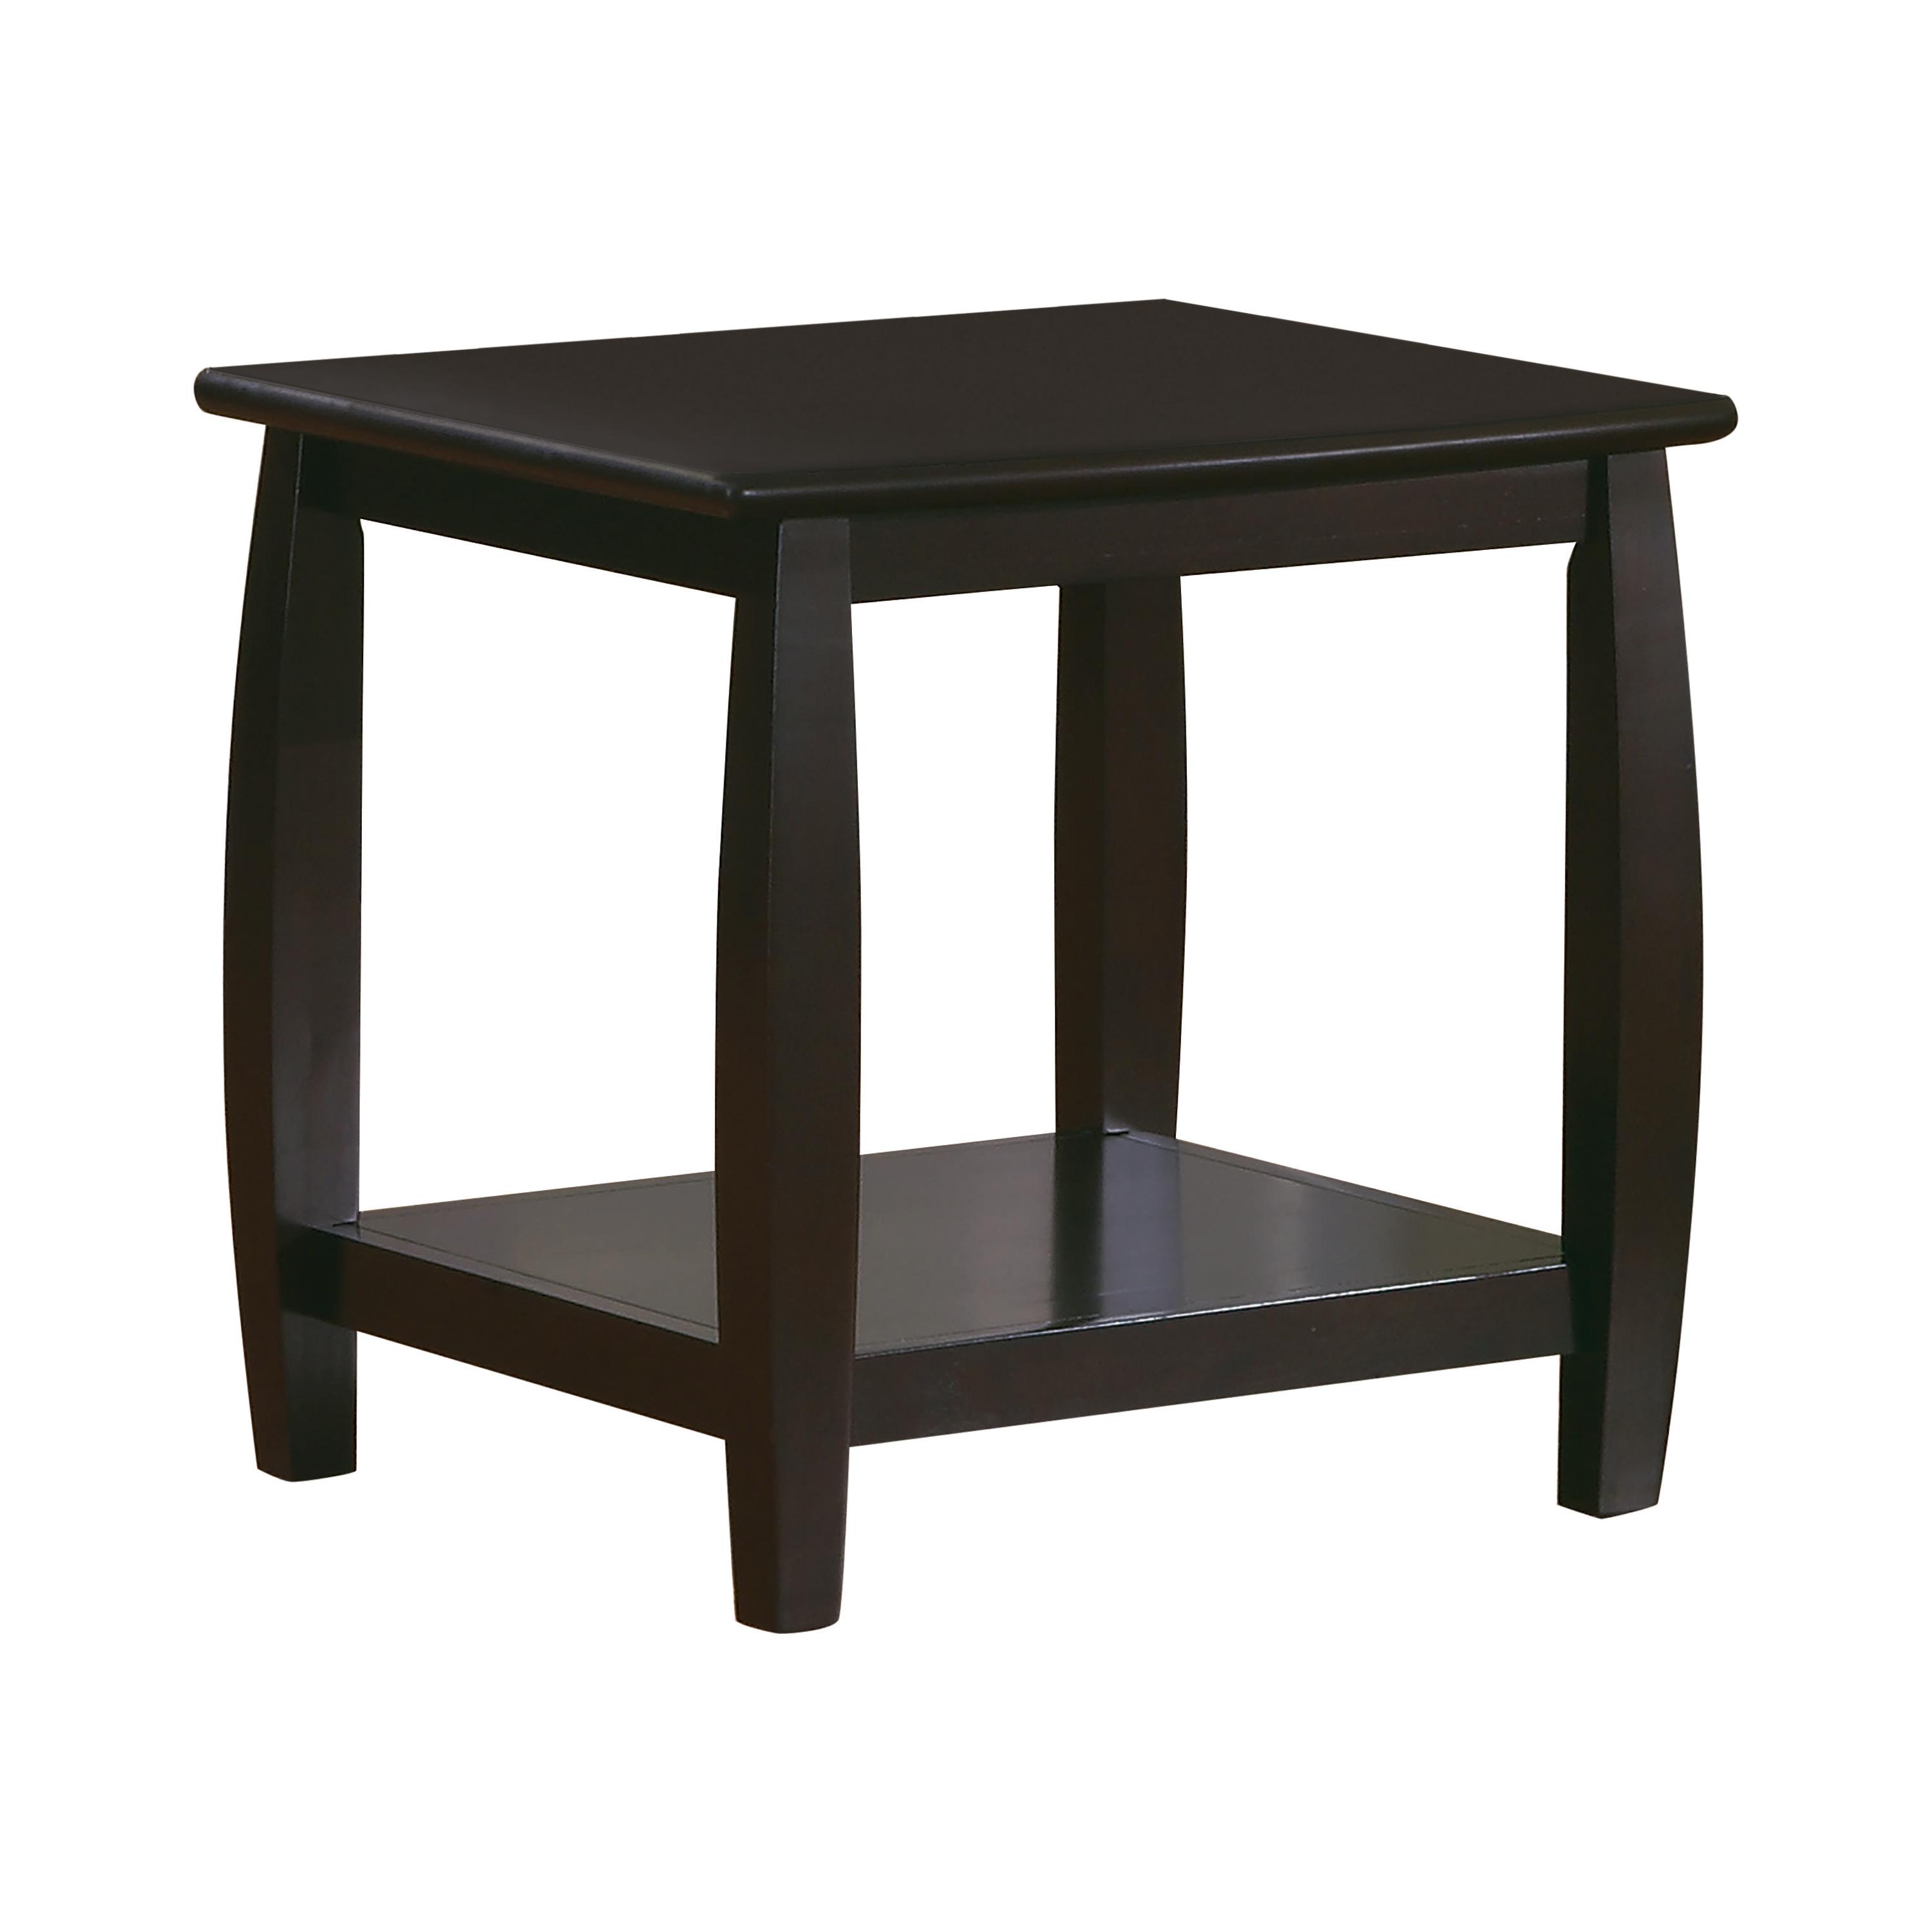 Transitional End Table 701077 701077 in Espresso 